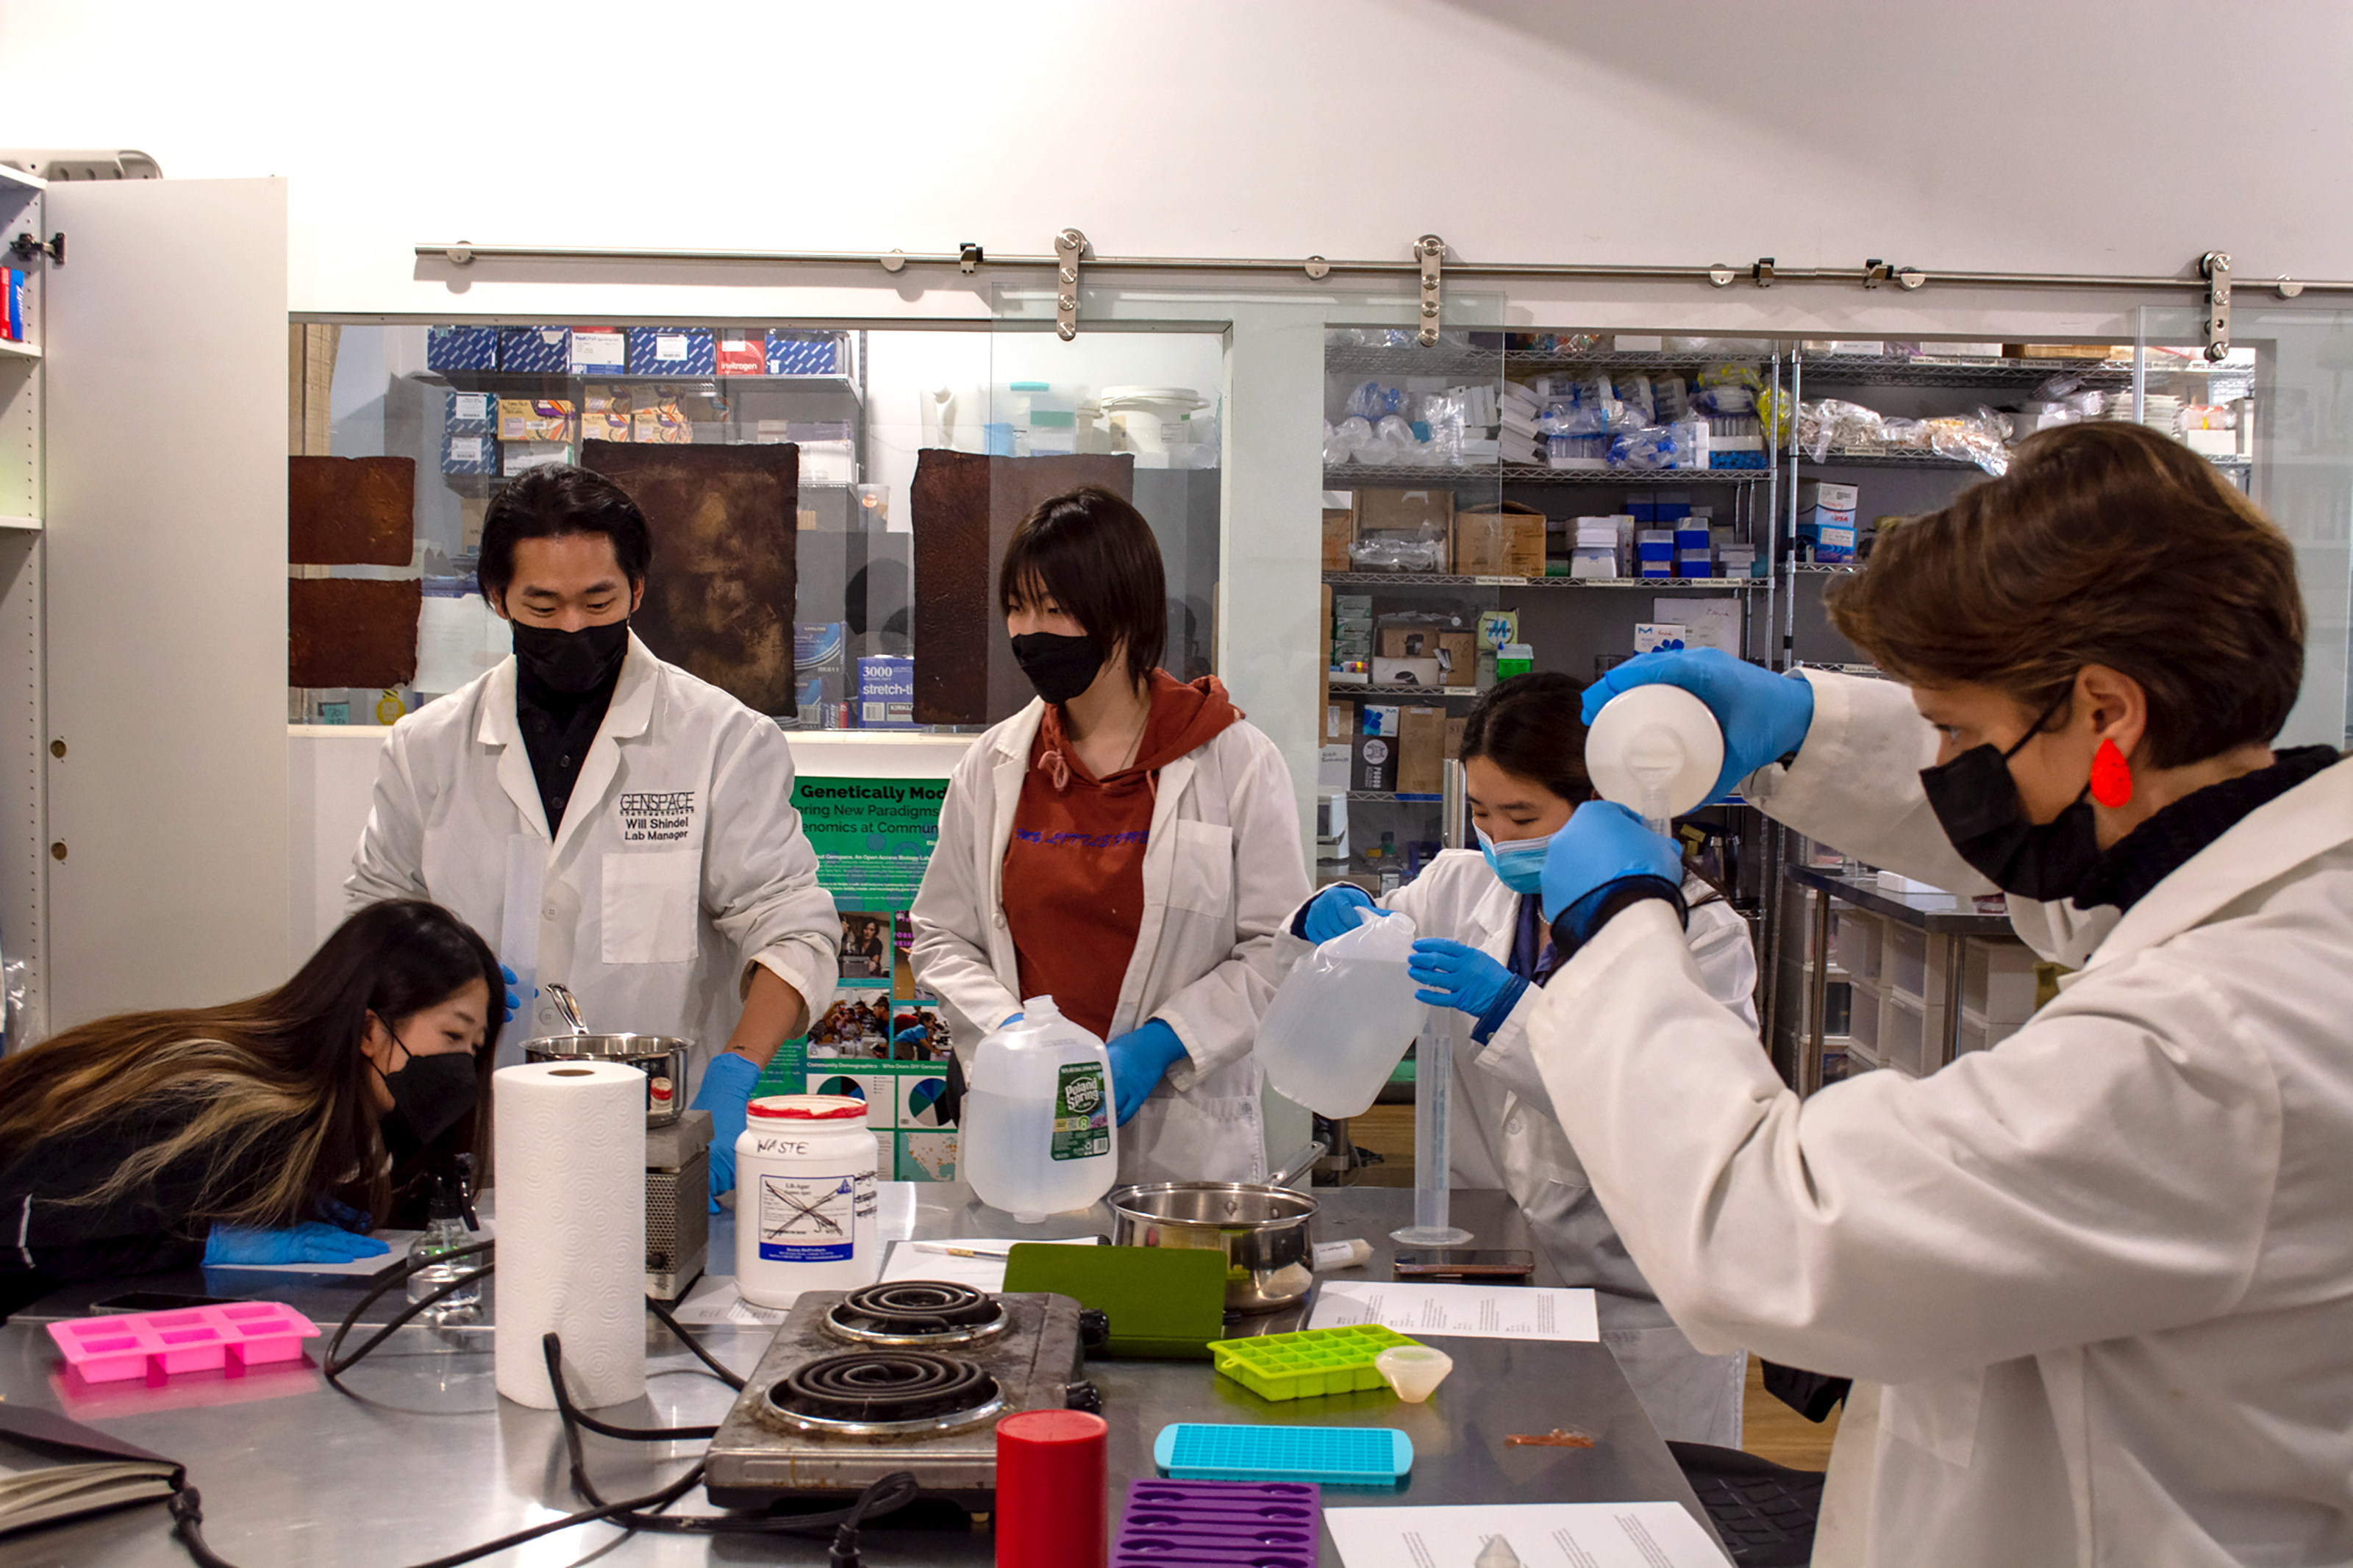 students gather around a lab table to experiment with "cooking" biomaterials on hot plates